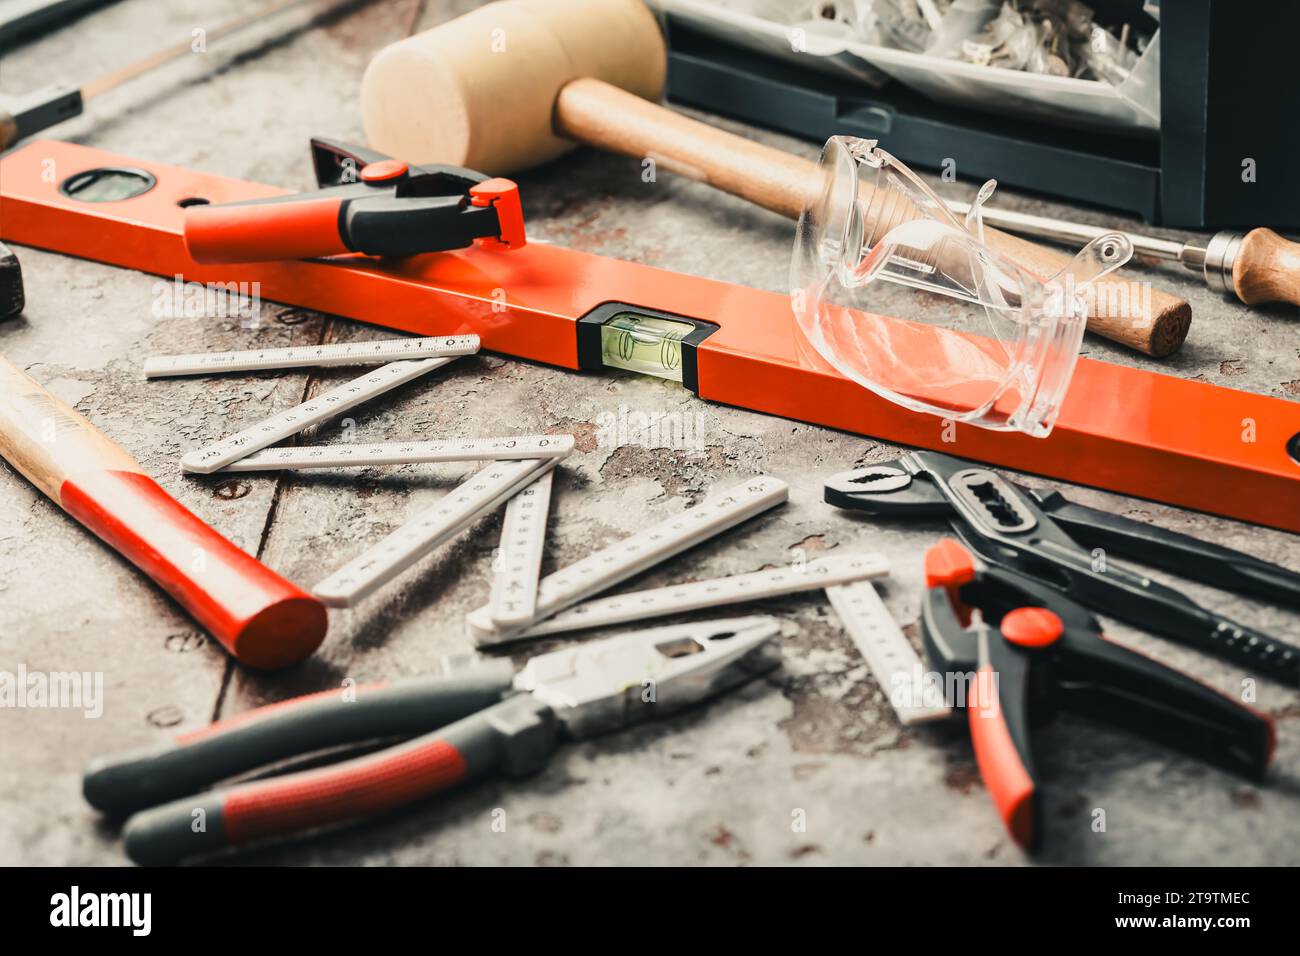 Handyman tool kit with assorted tools, gogles Stock Photo